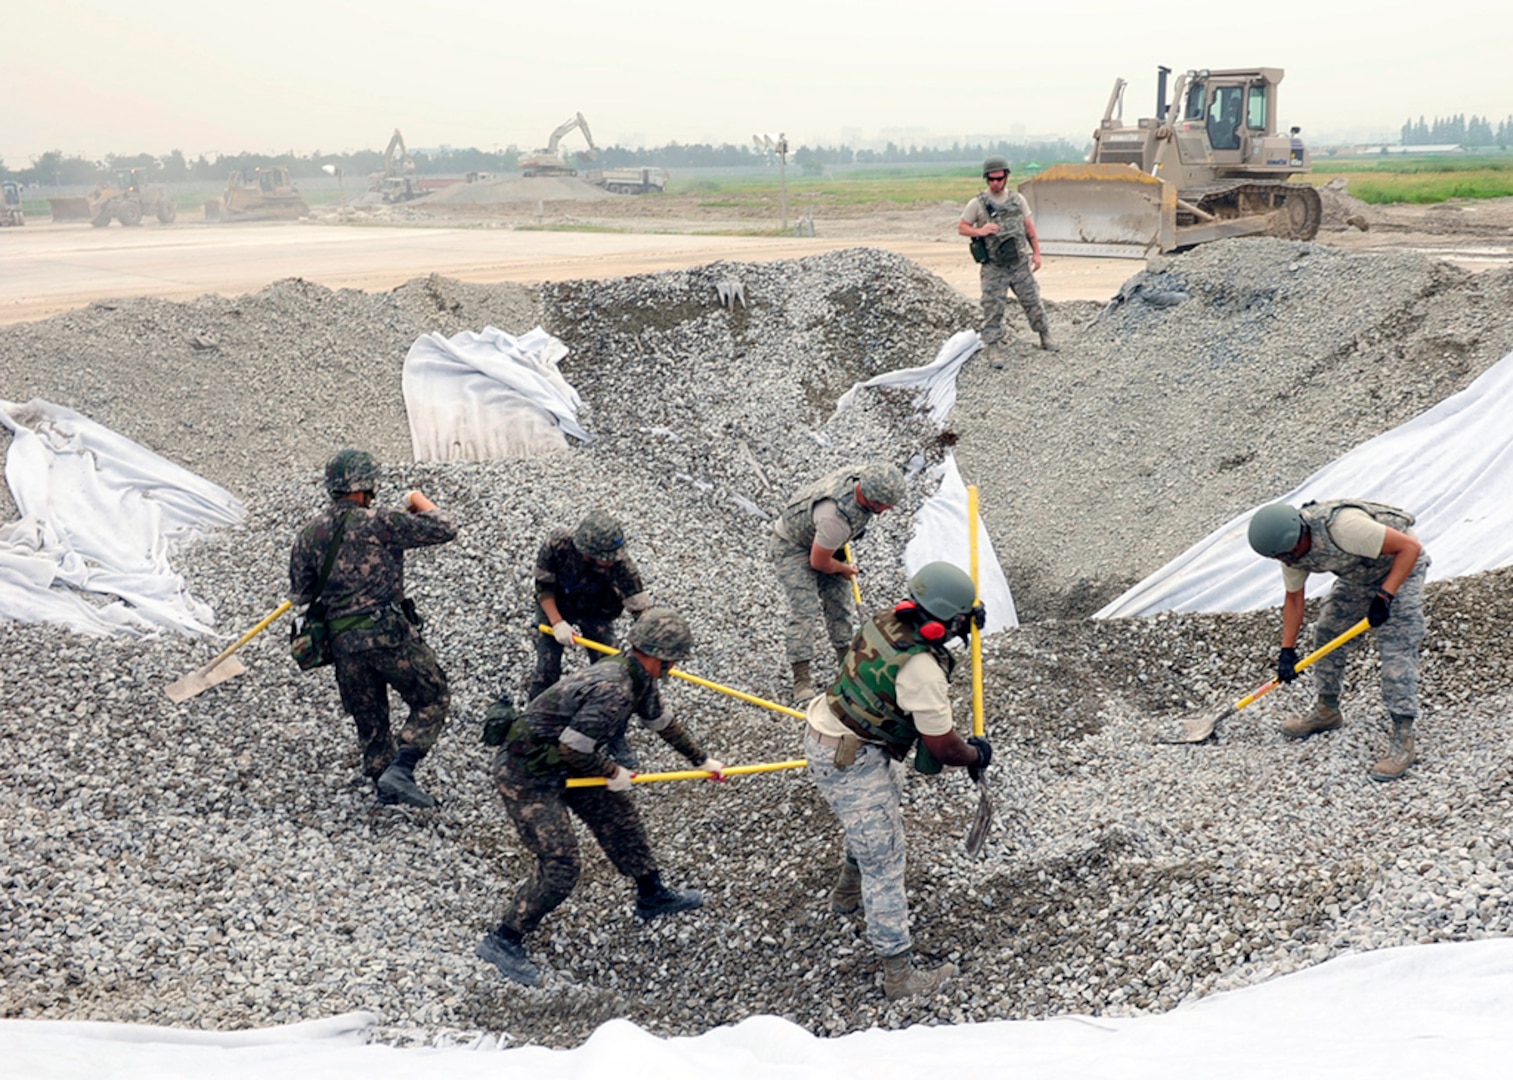 GWANGJU AIR BASE, Republic of Korea (June 1, 2016) - Airmen assigned to Pacific Air Forces bases excavate and refill a crater on the airfield during an Airfield Damage Repair bilateral training scenario.  The training is part of Pacific Unity, a bilateral training exercise designed to enhance interoperability and build partnership capacity in the Indo-Asia Pacific region.  